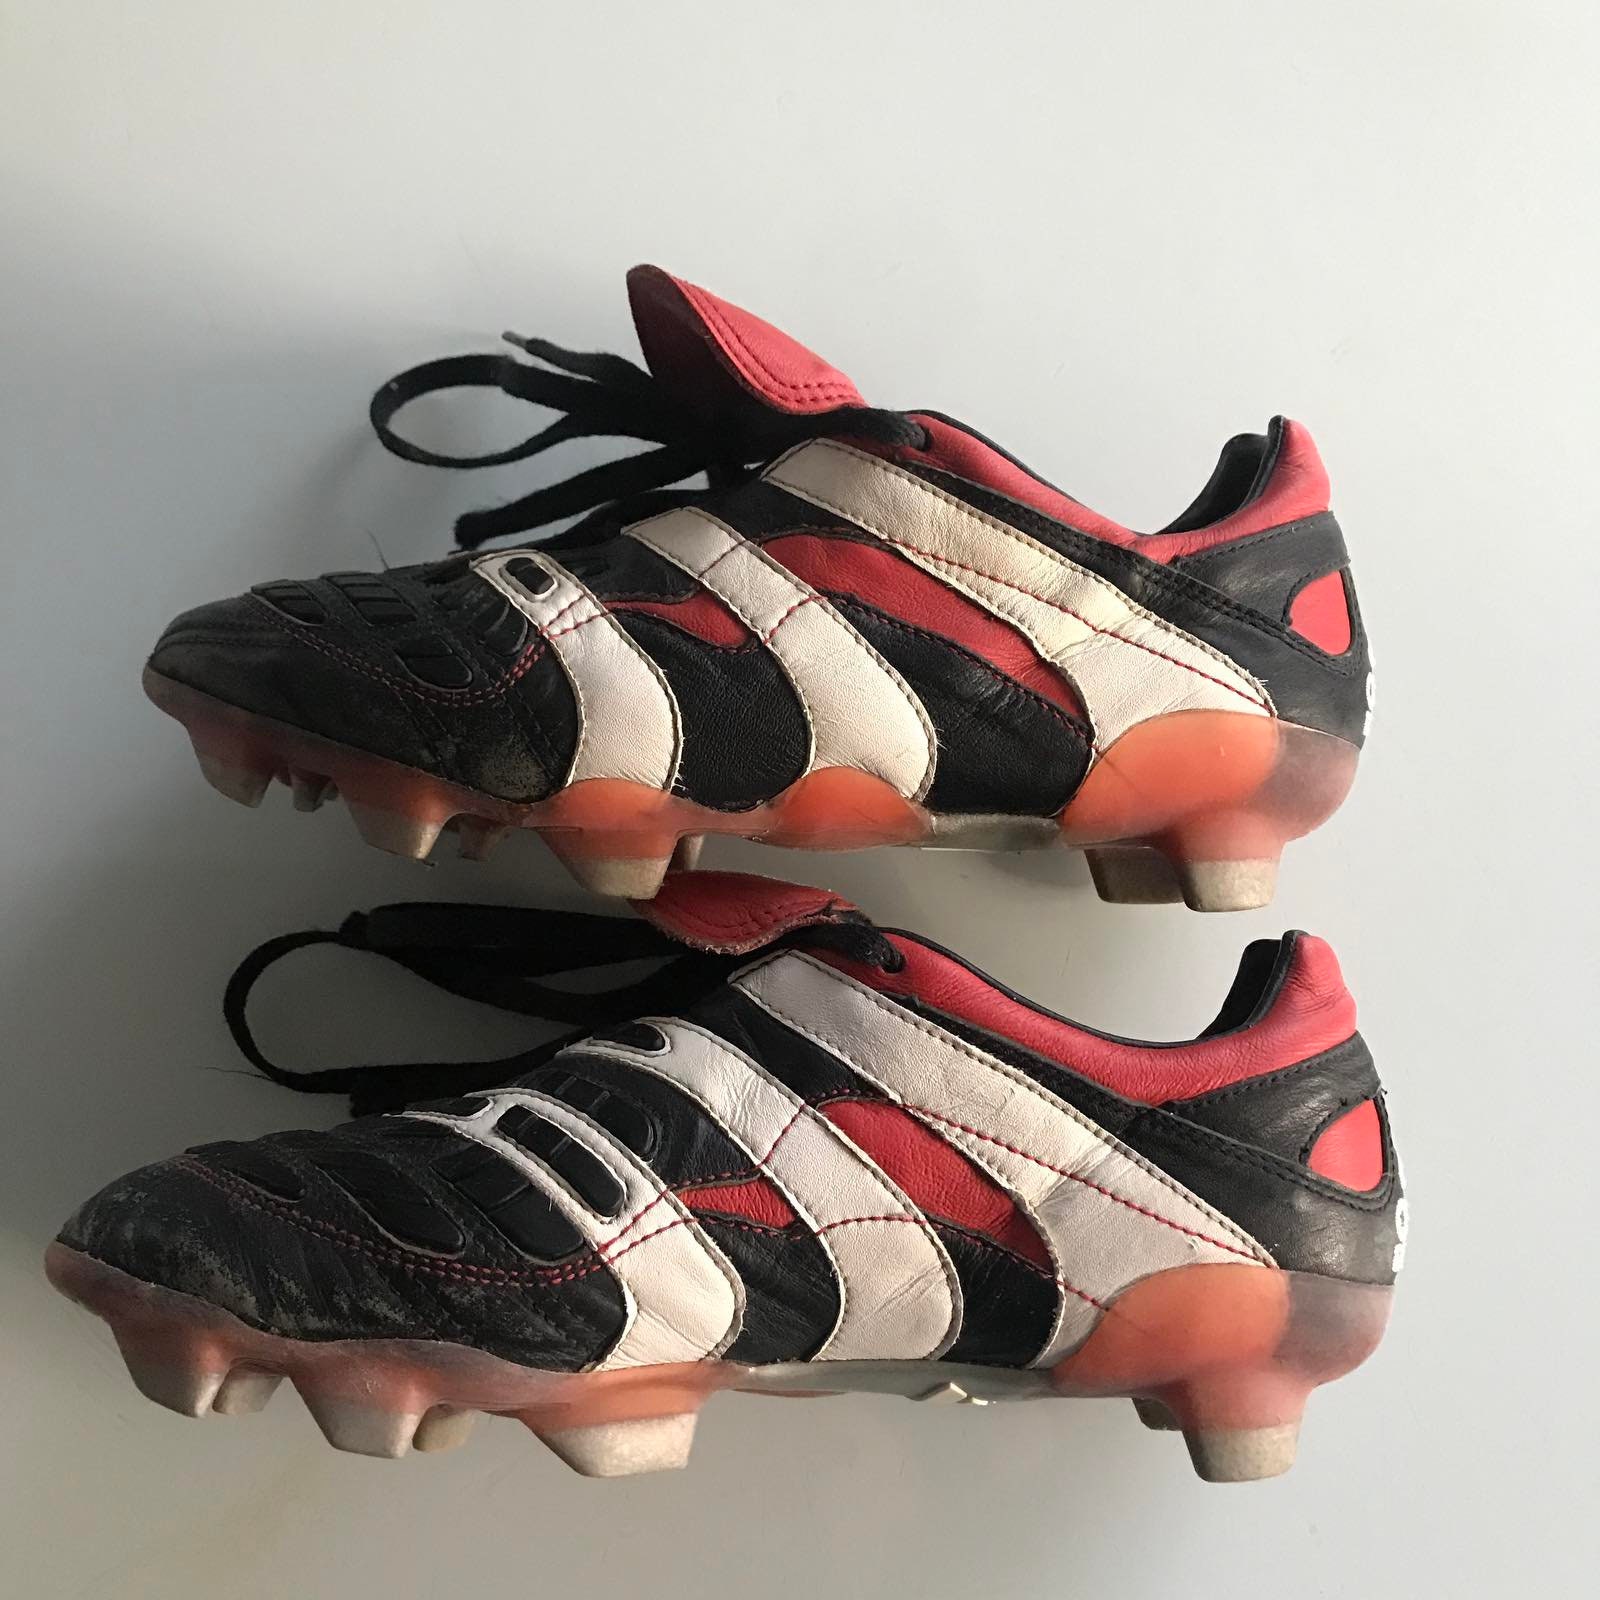 adidas x EA Anthem Custom Player Boots - Soccer Cleats 101